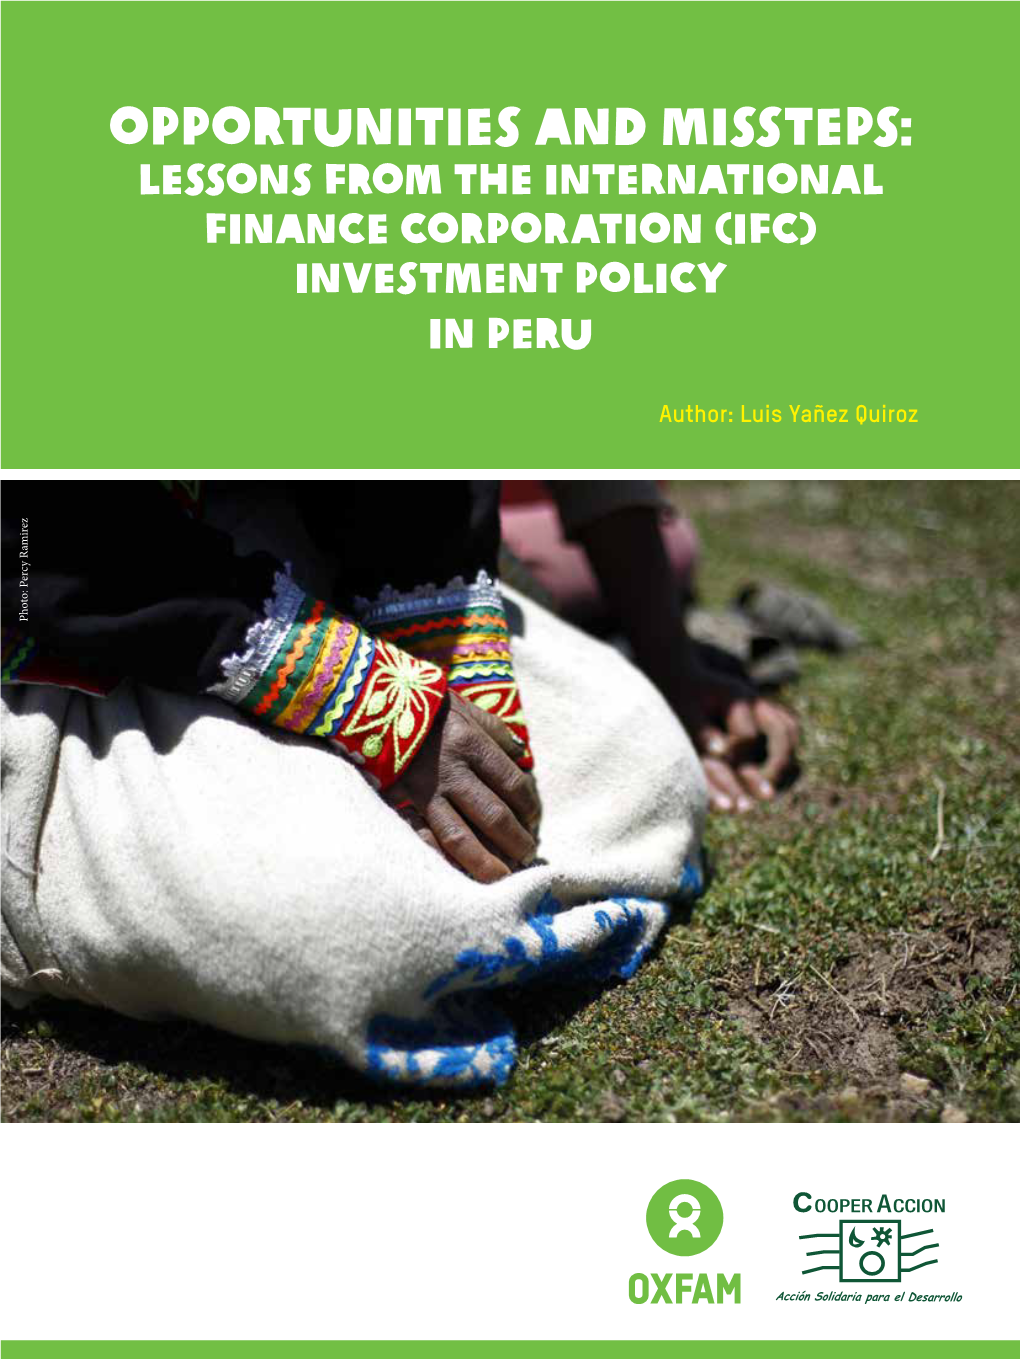 Opportunities and Missteps: Lessons from the International Finance Corporation (Ifc) Investment Policy in Peru